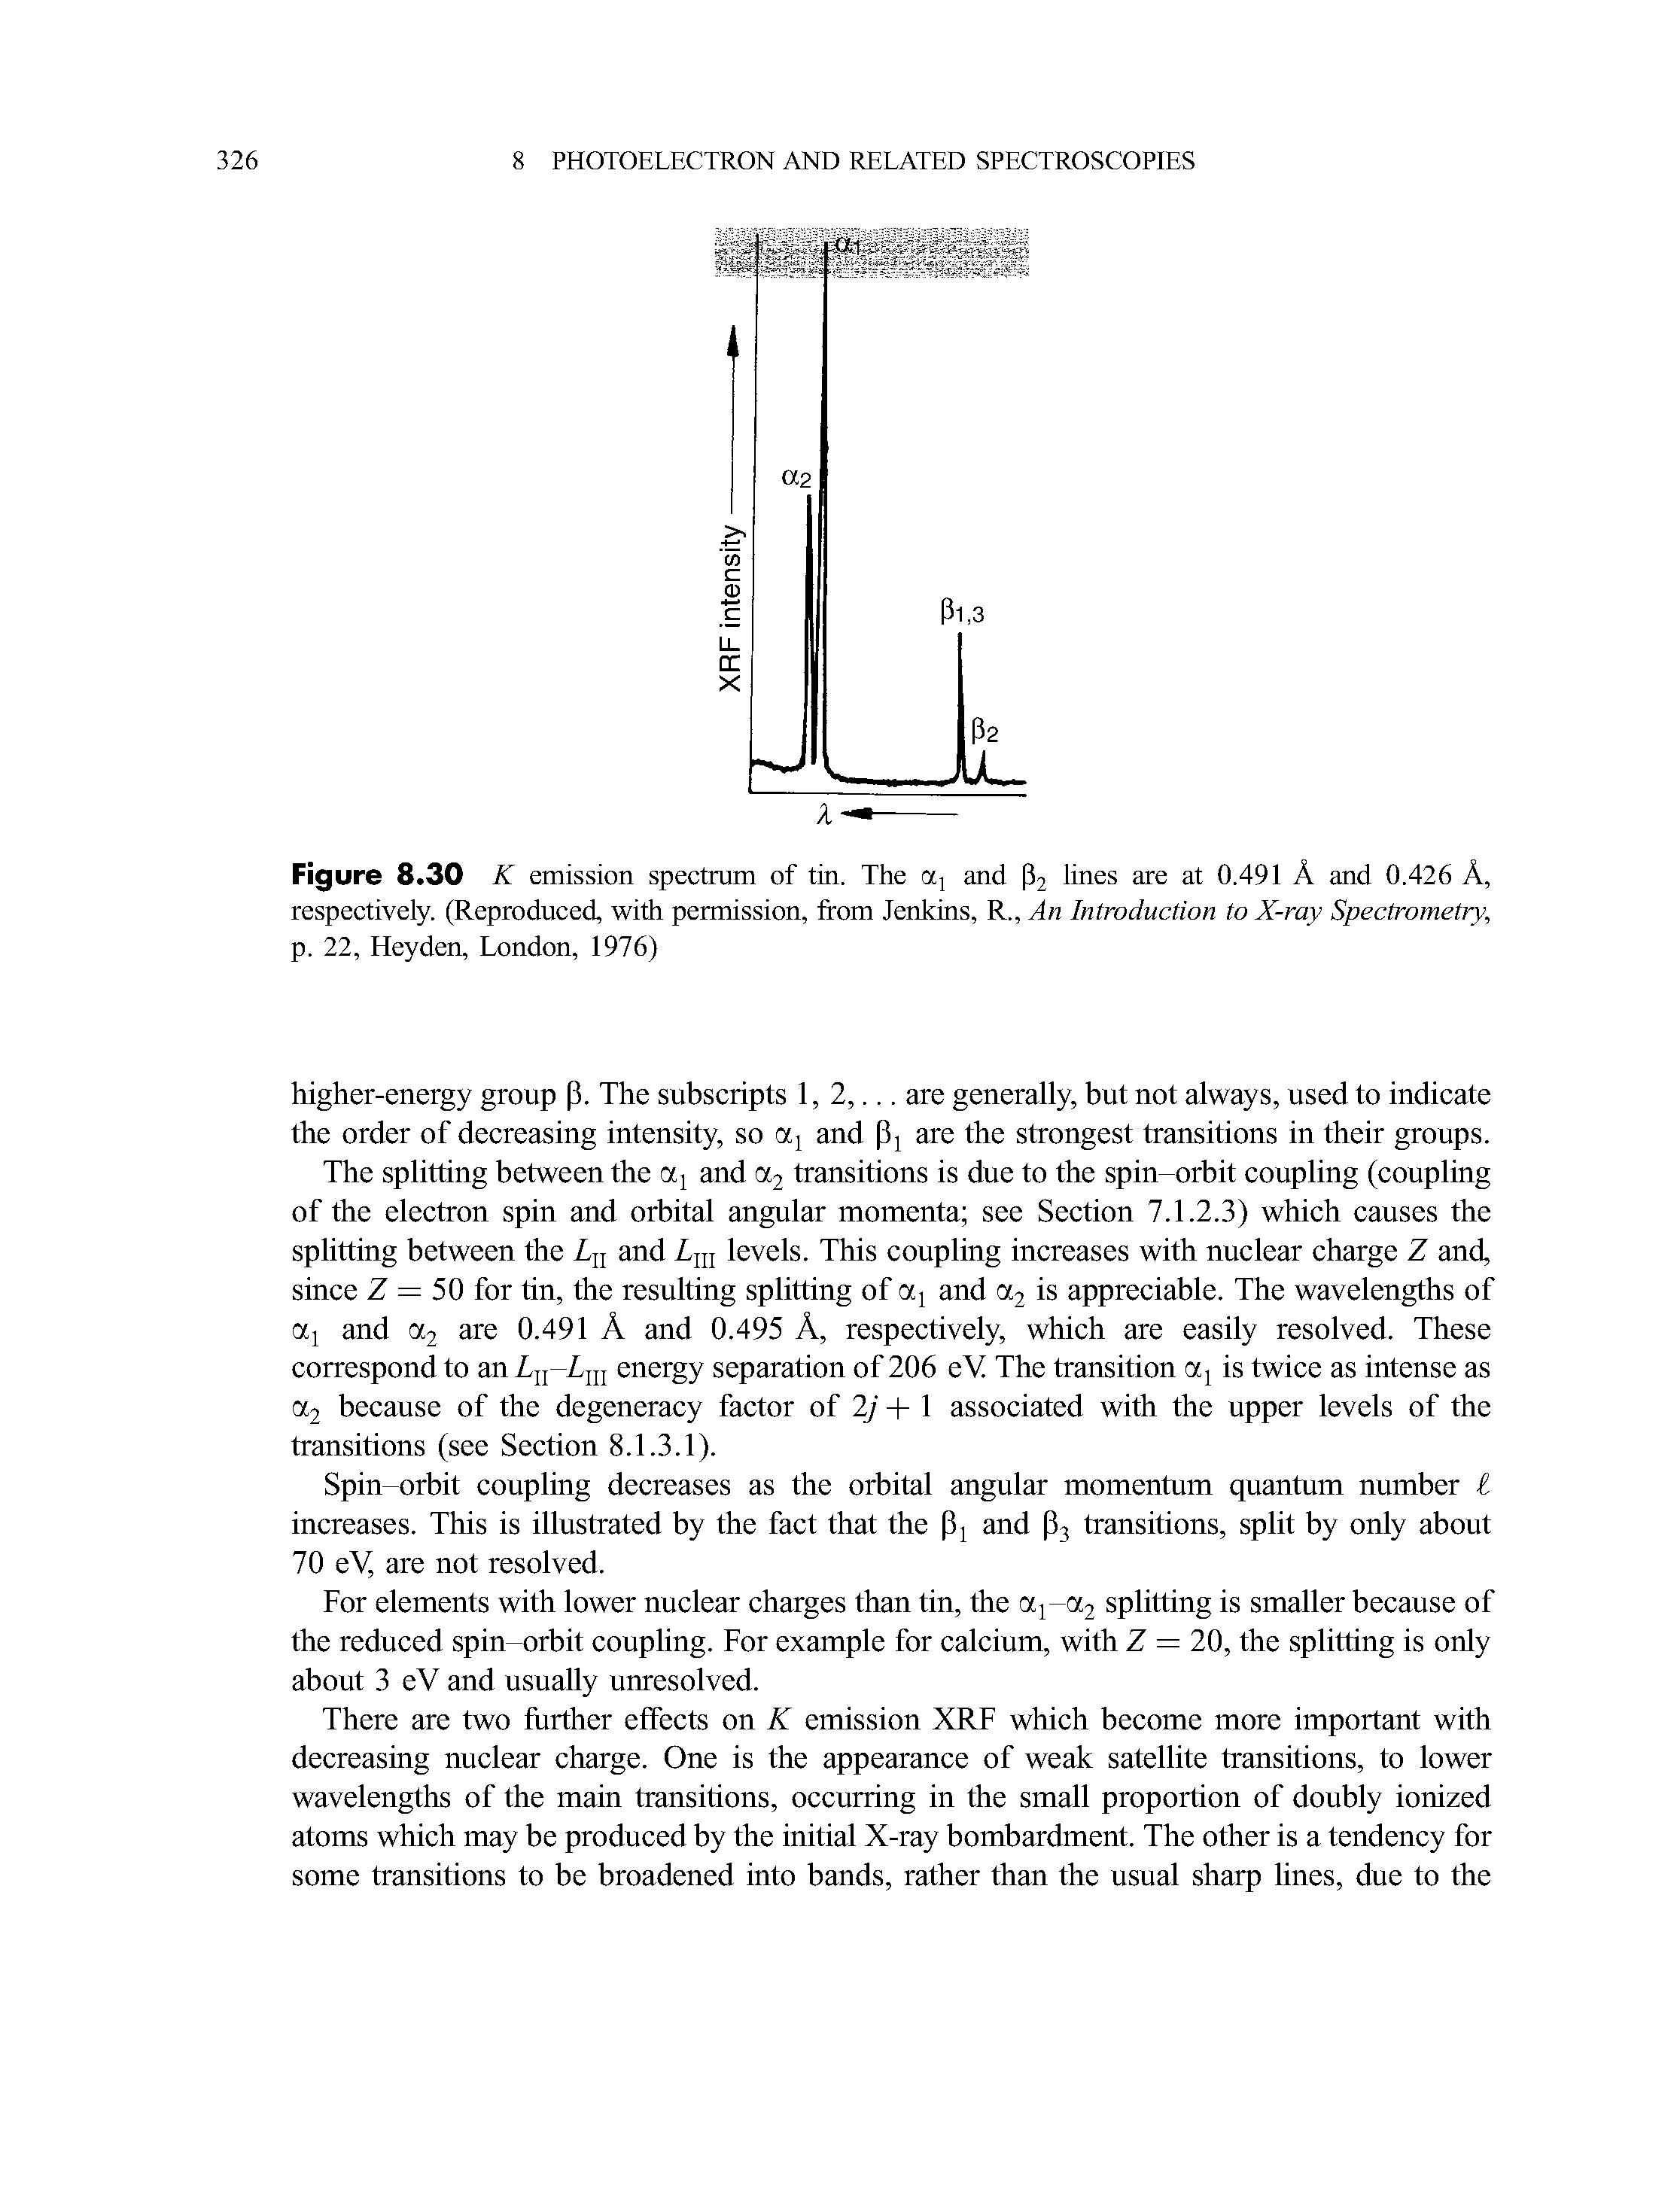 Figure 8.30 K emission spectrum of tin. The ] and P2 lines are at 0.491 A and 0.426 A, respectively. (Reproduced, with permission, from Jenkins, R., An Introduction to X-ray Spectrometry, p. 22, Hey den, London, 1976)...